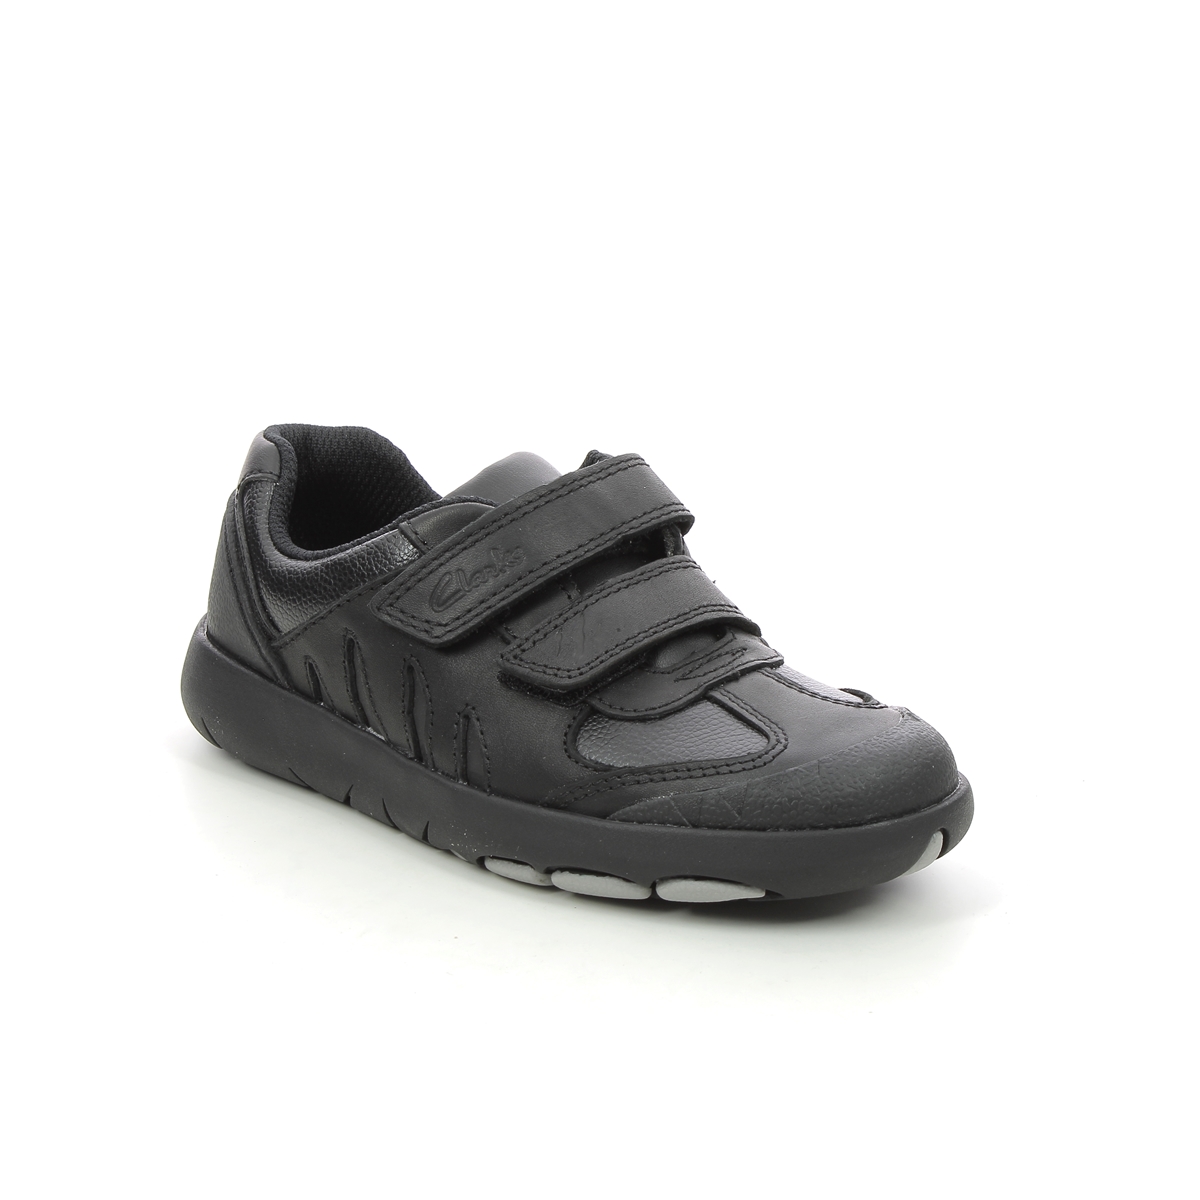 Clarks Rex Stride K Black Leather Kids Boys Shoes 626987G In Size 1.5 In Plain Black Leather G Width Fitting For School For kids